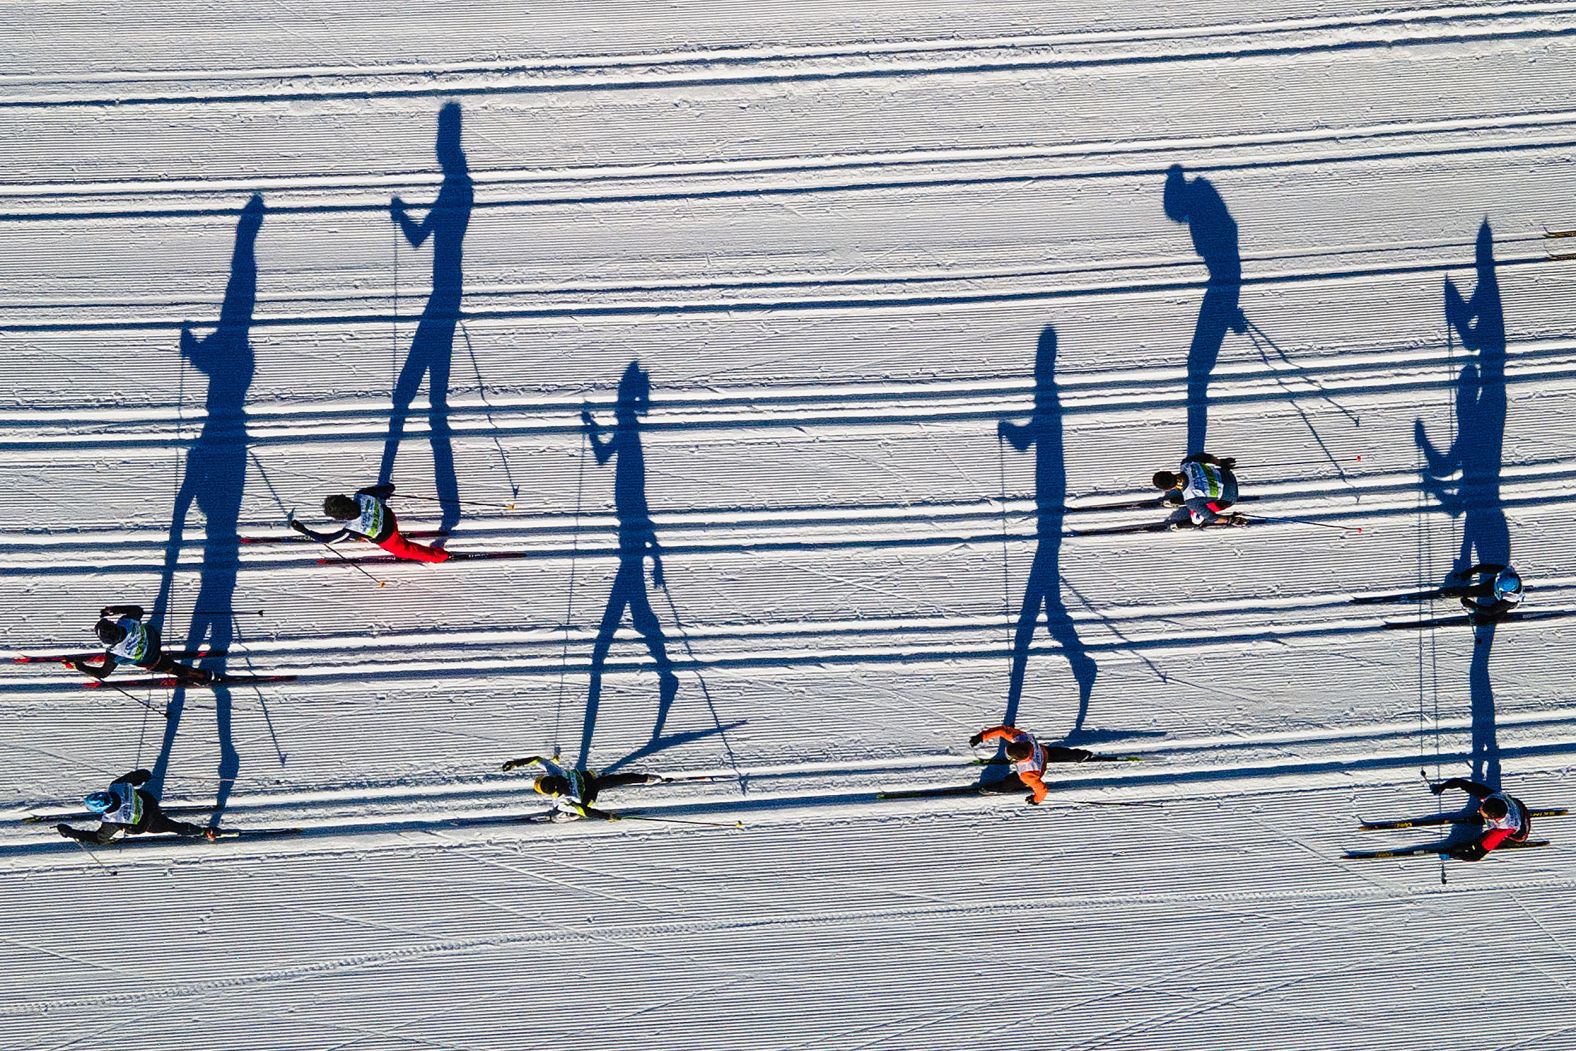 Cross-country skiers compete in the Marxa Beret race in Baqueira Beret, Spain, on Sunday, February 4.